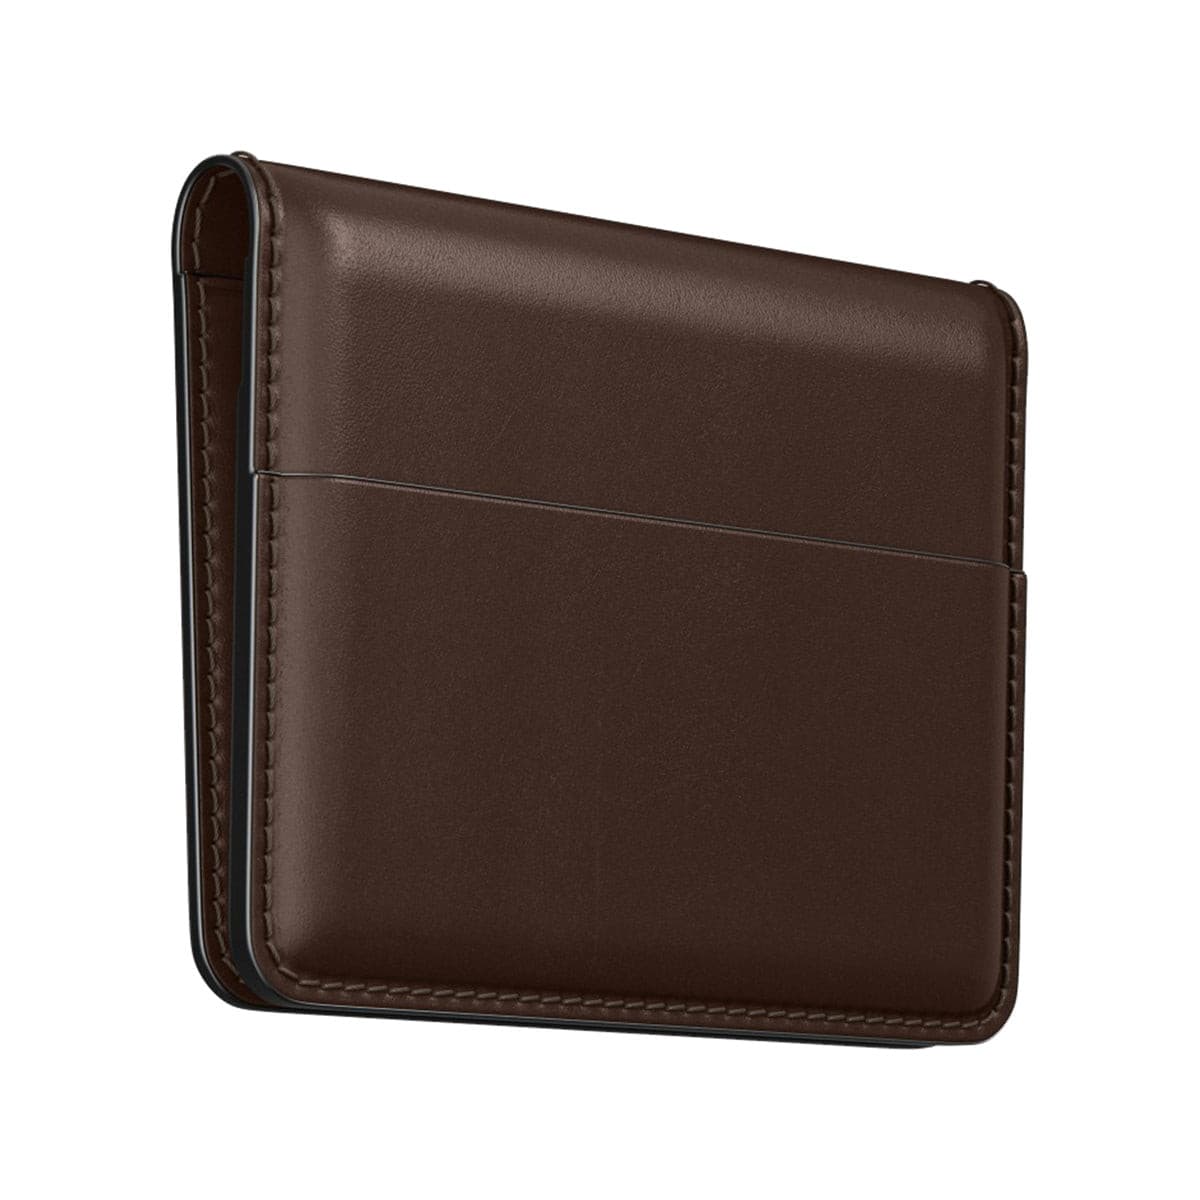 NOMAD Card Wallet Plus - Rustic Brown Horween Leather.